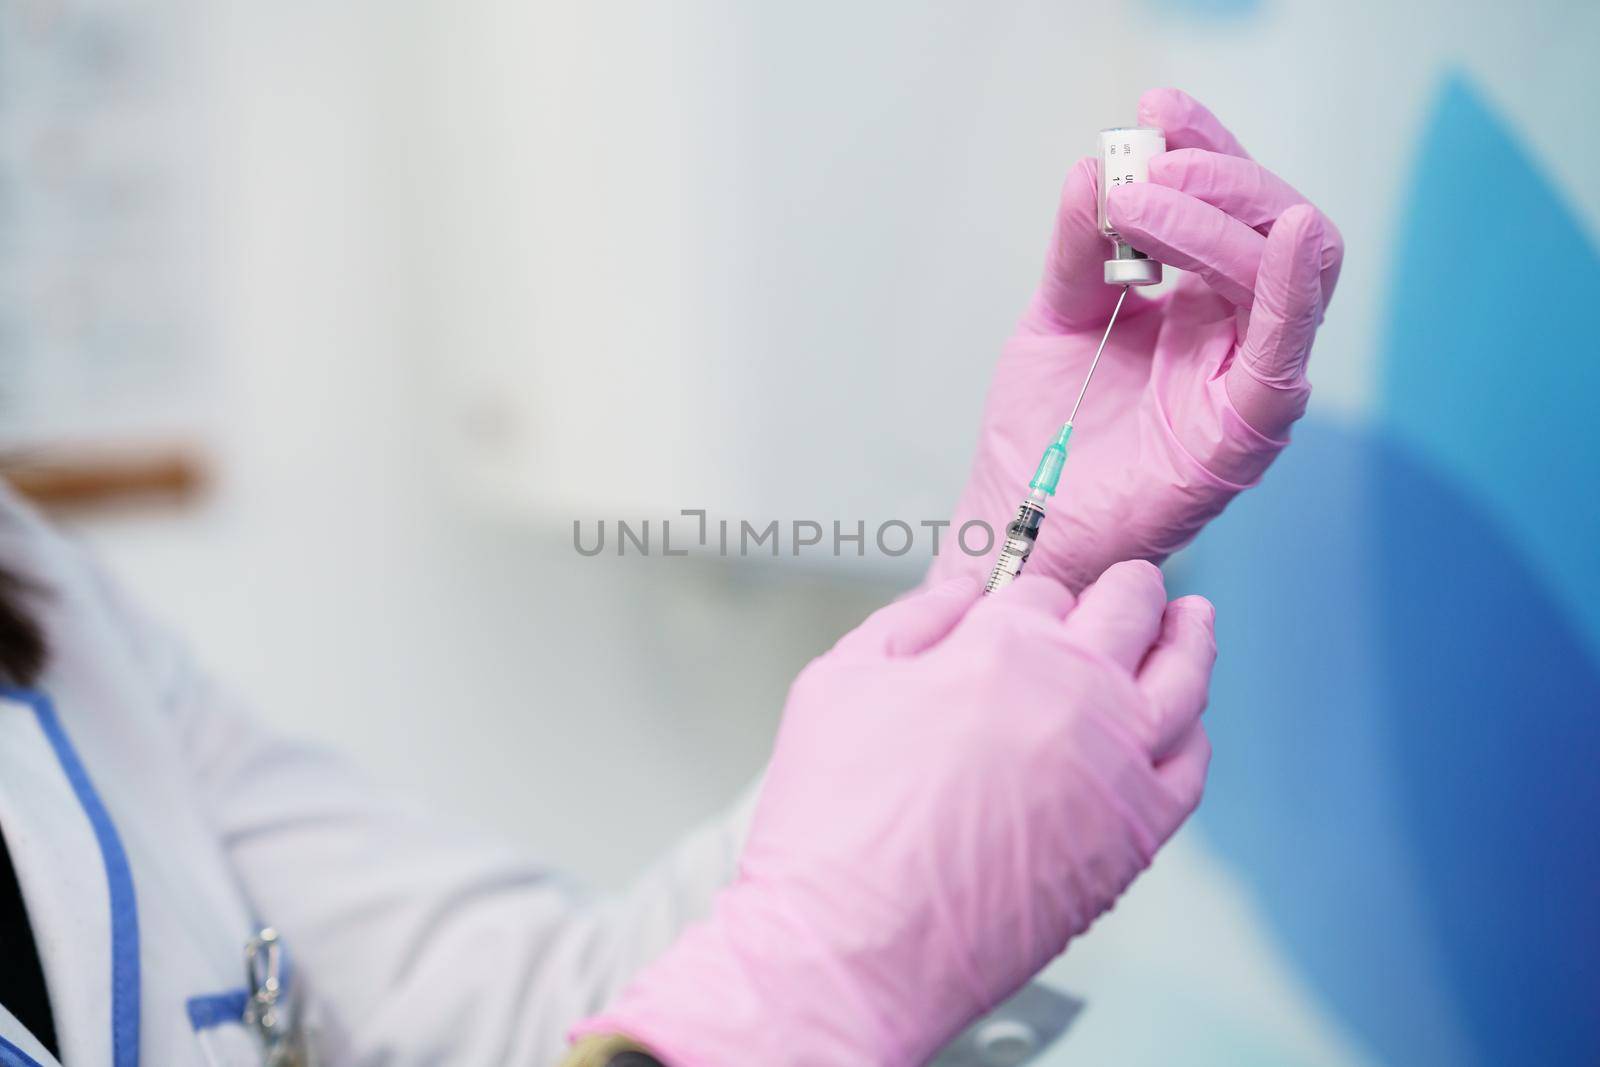 Aesthetic doctor preparing the syringe with the botulinum toxin to be injected in her patient.